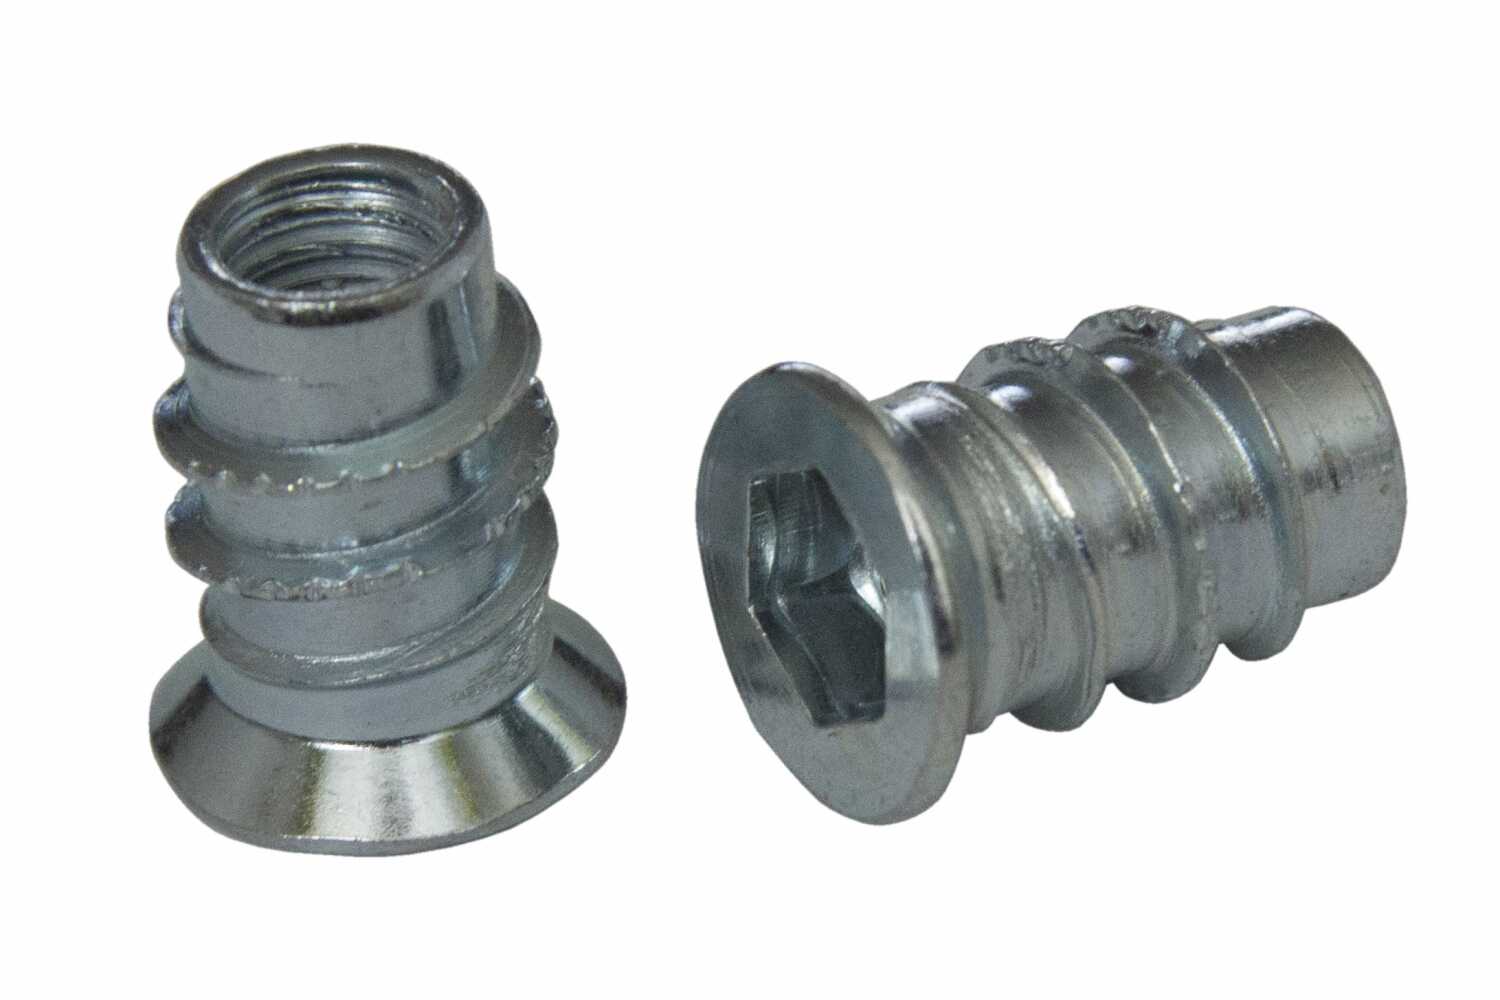 AN 422 zinc Coupling threaded to wood